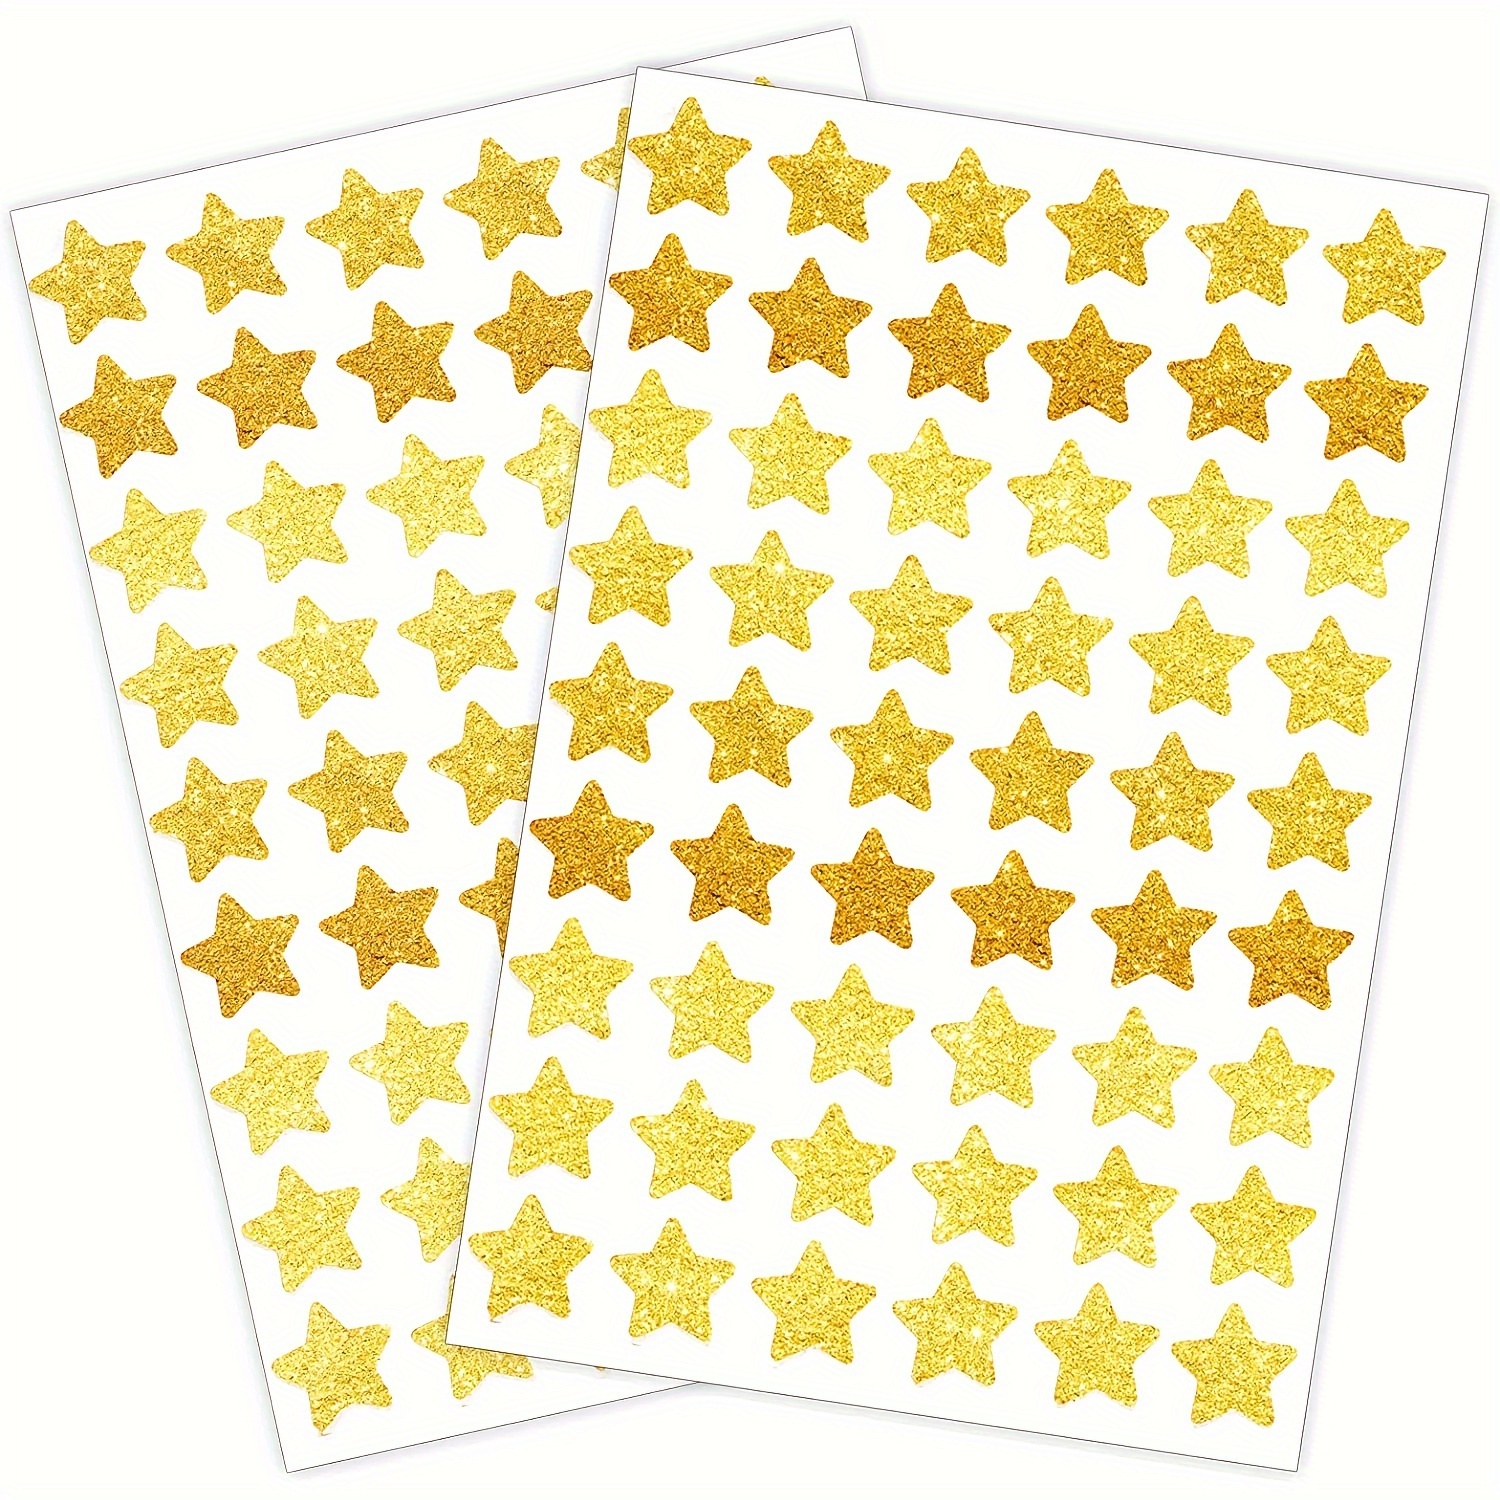 1 Sheet Cute Colorful Star Pattern Stickers DIY Toploader